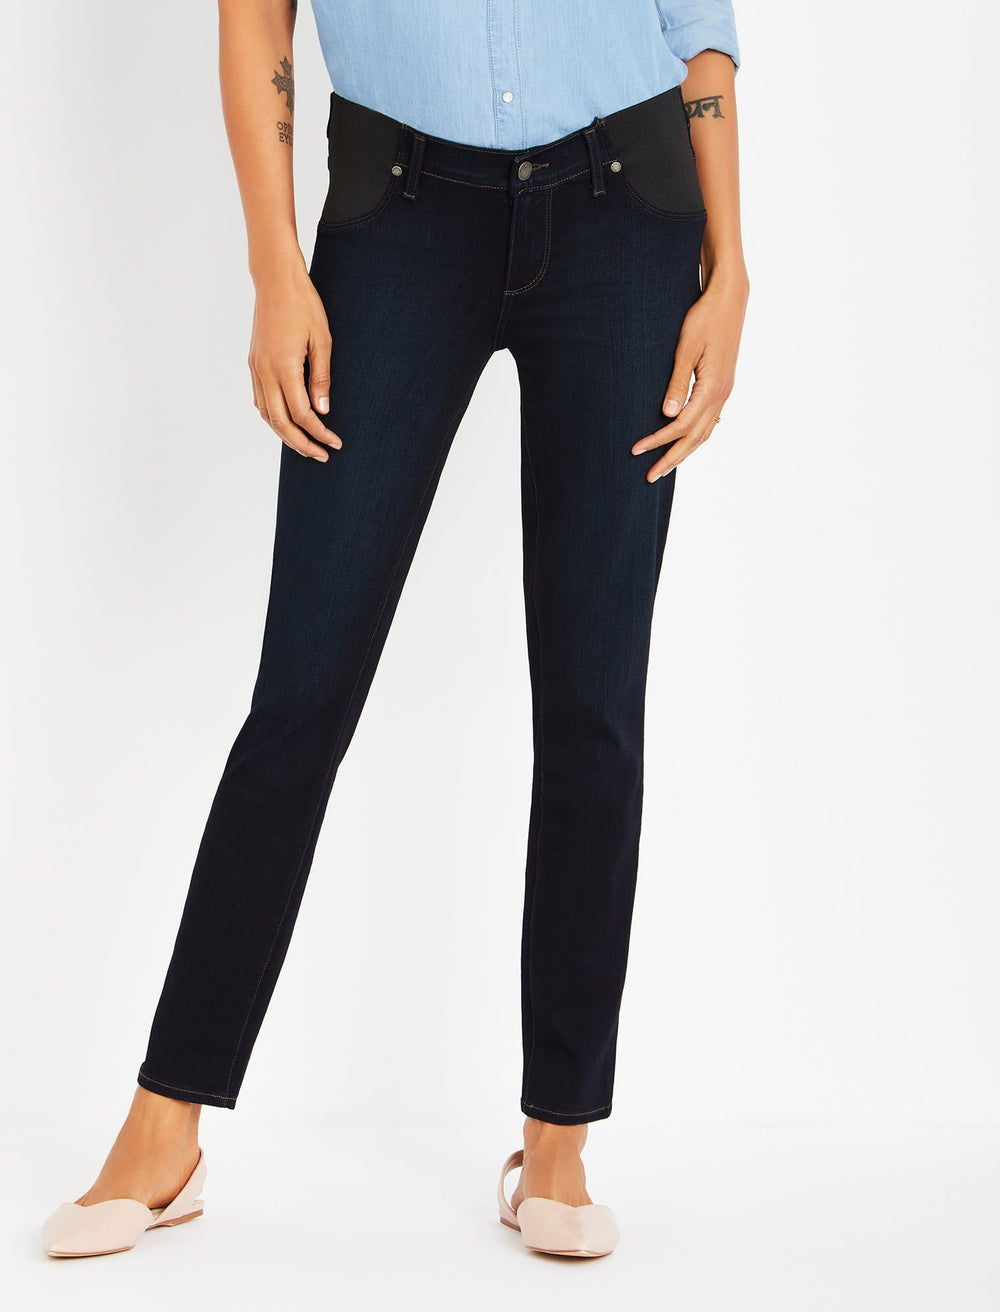 Paige Side Panel Verdugo Ankle Maternity Jeans